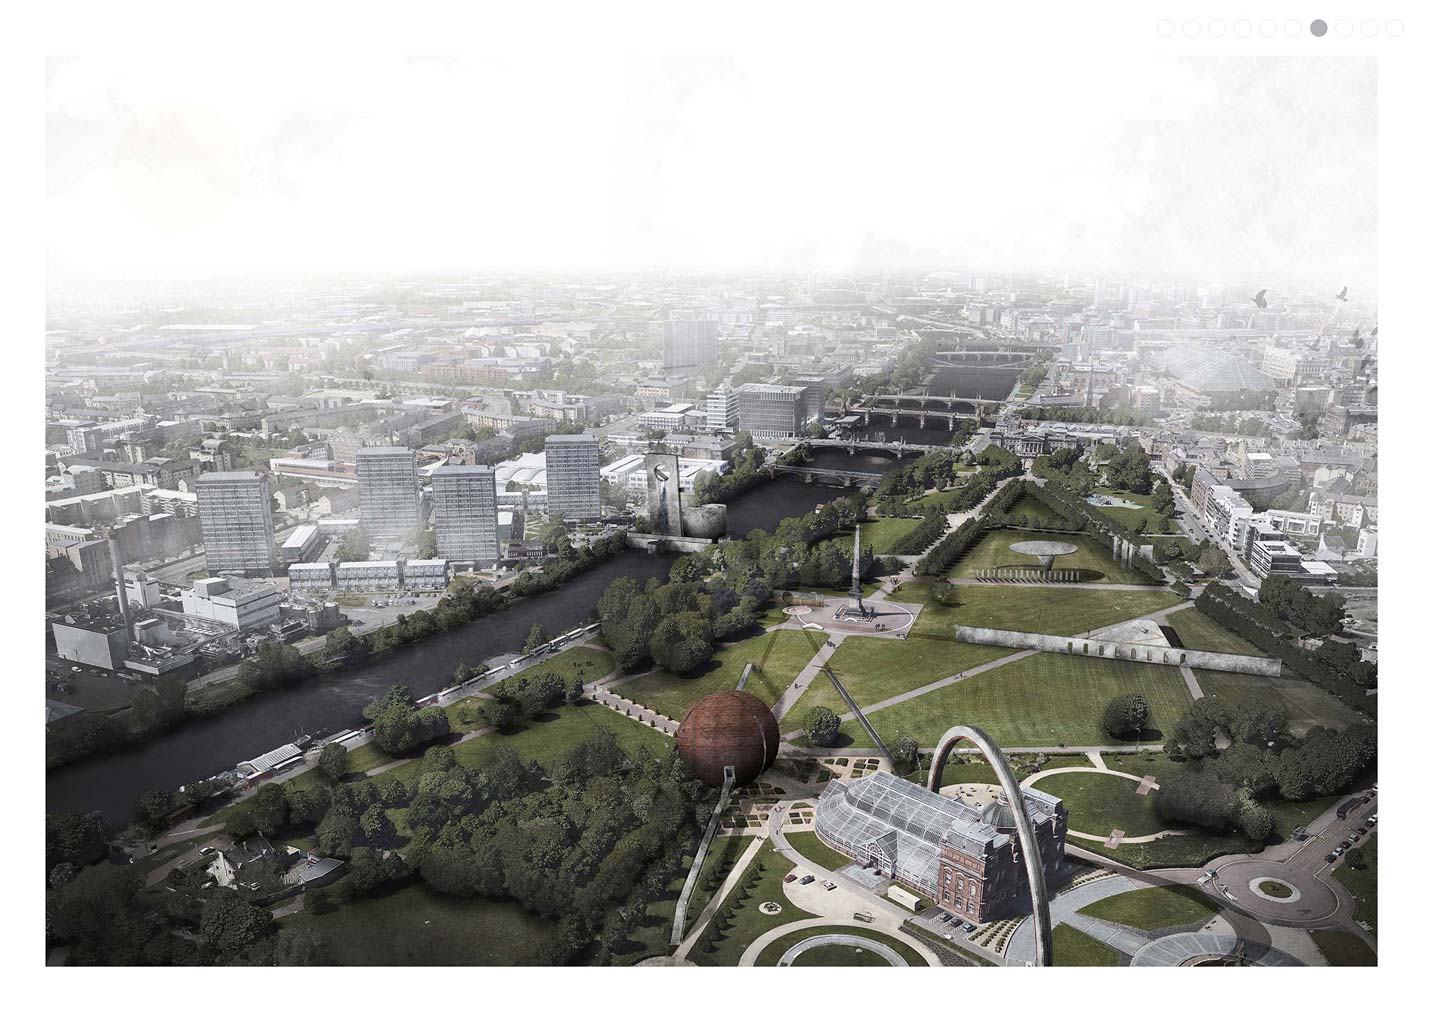 An architectural image of a birds-eye view of Glasgow Green with a proposed development including a large arch